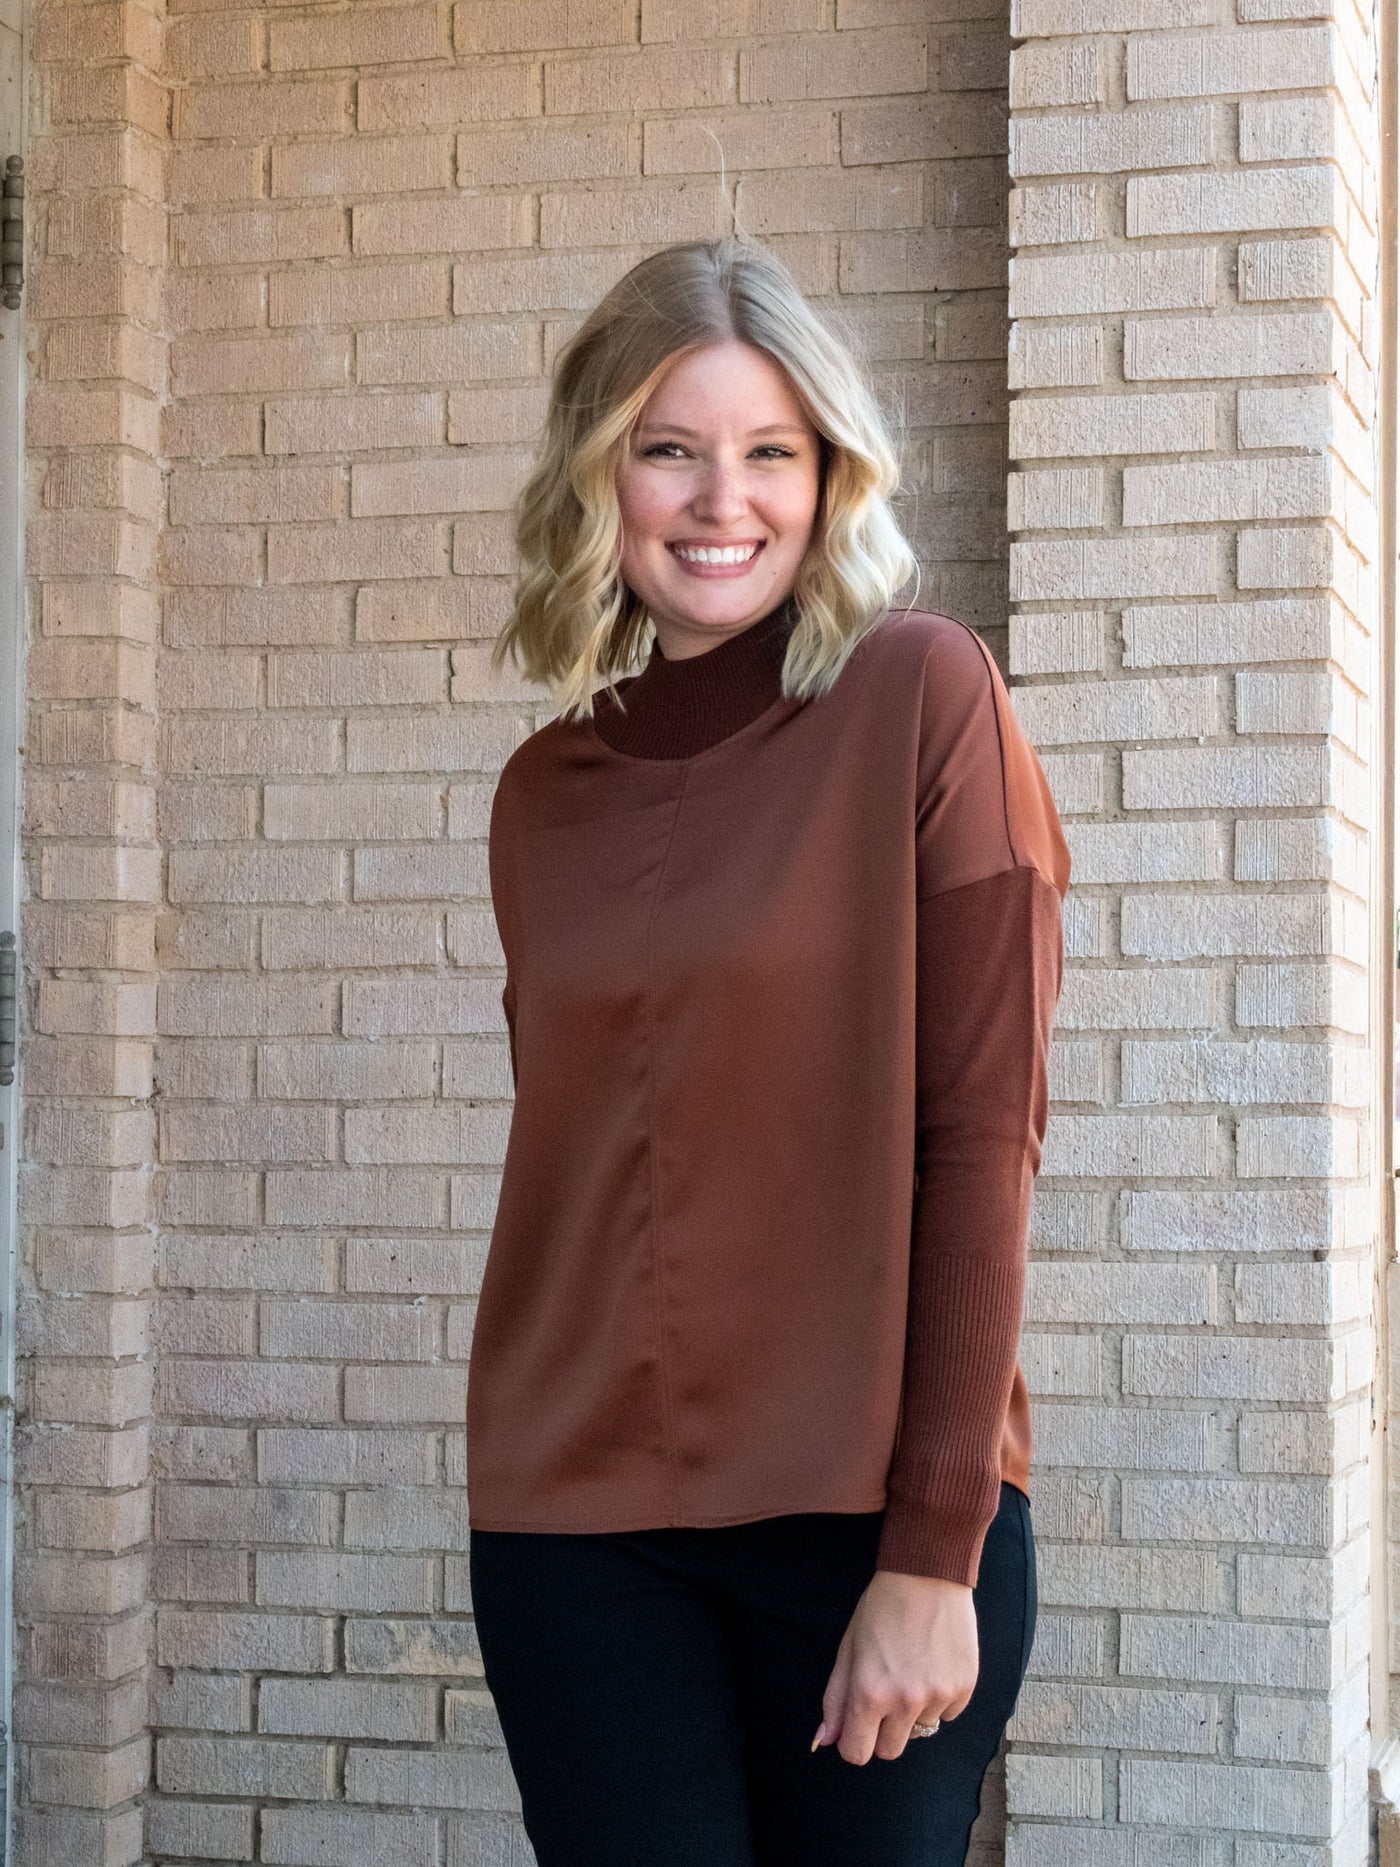 A model wearing a rust brown top with knit sleeves. She has it paired with black pants.